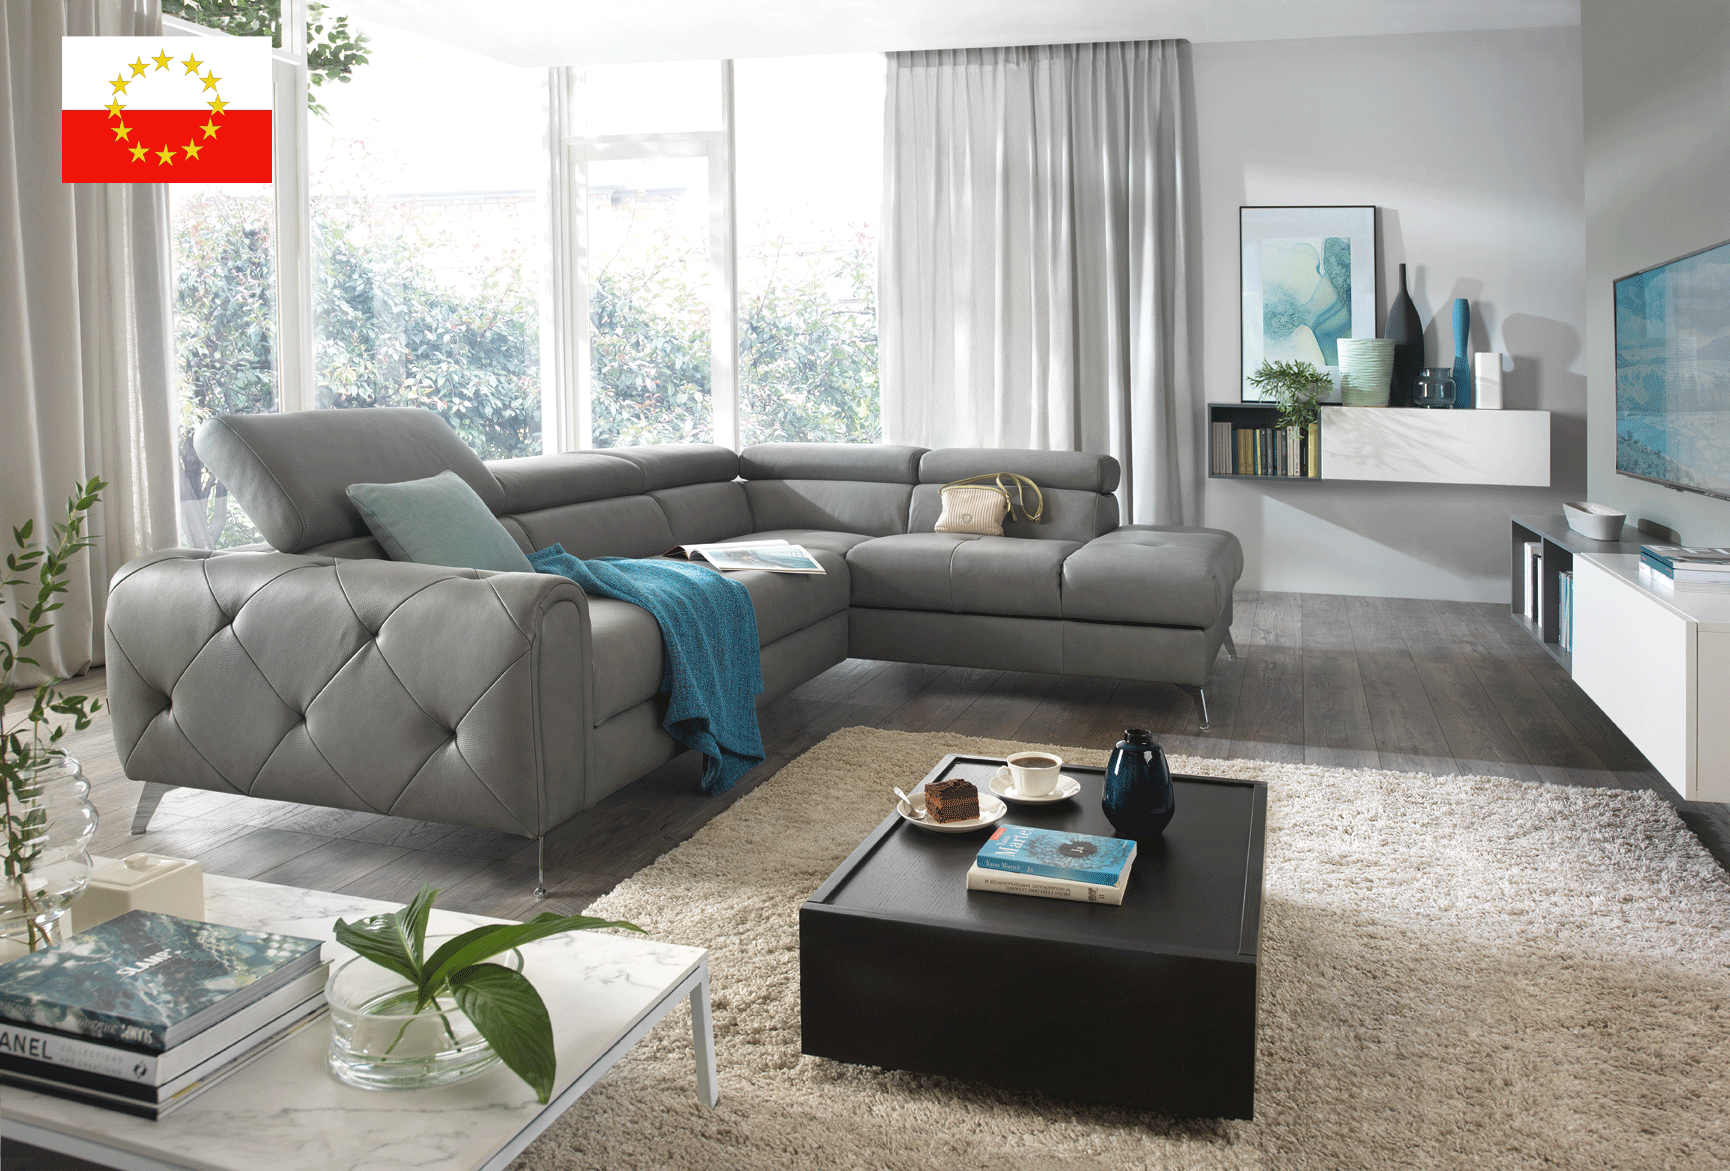 Living Room Furniture Reclining and Sliding Seats Sets Camelia Sectional w/Bed and Storage